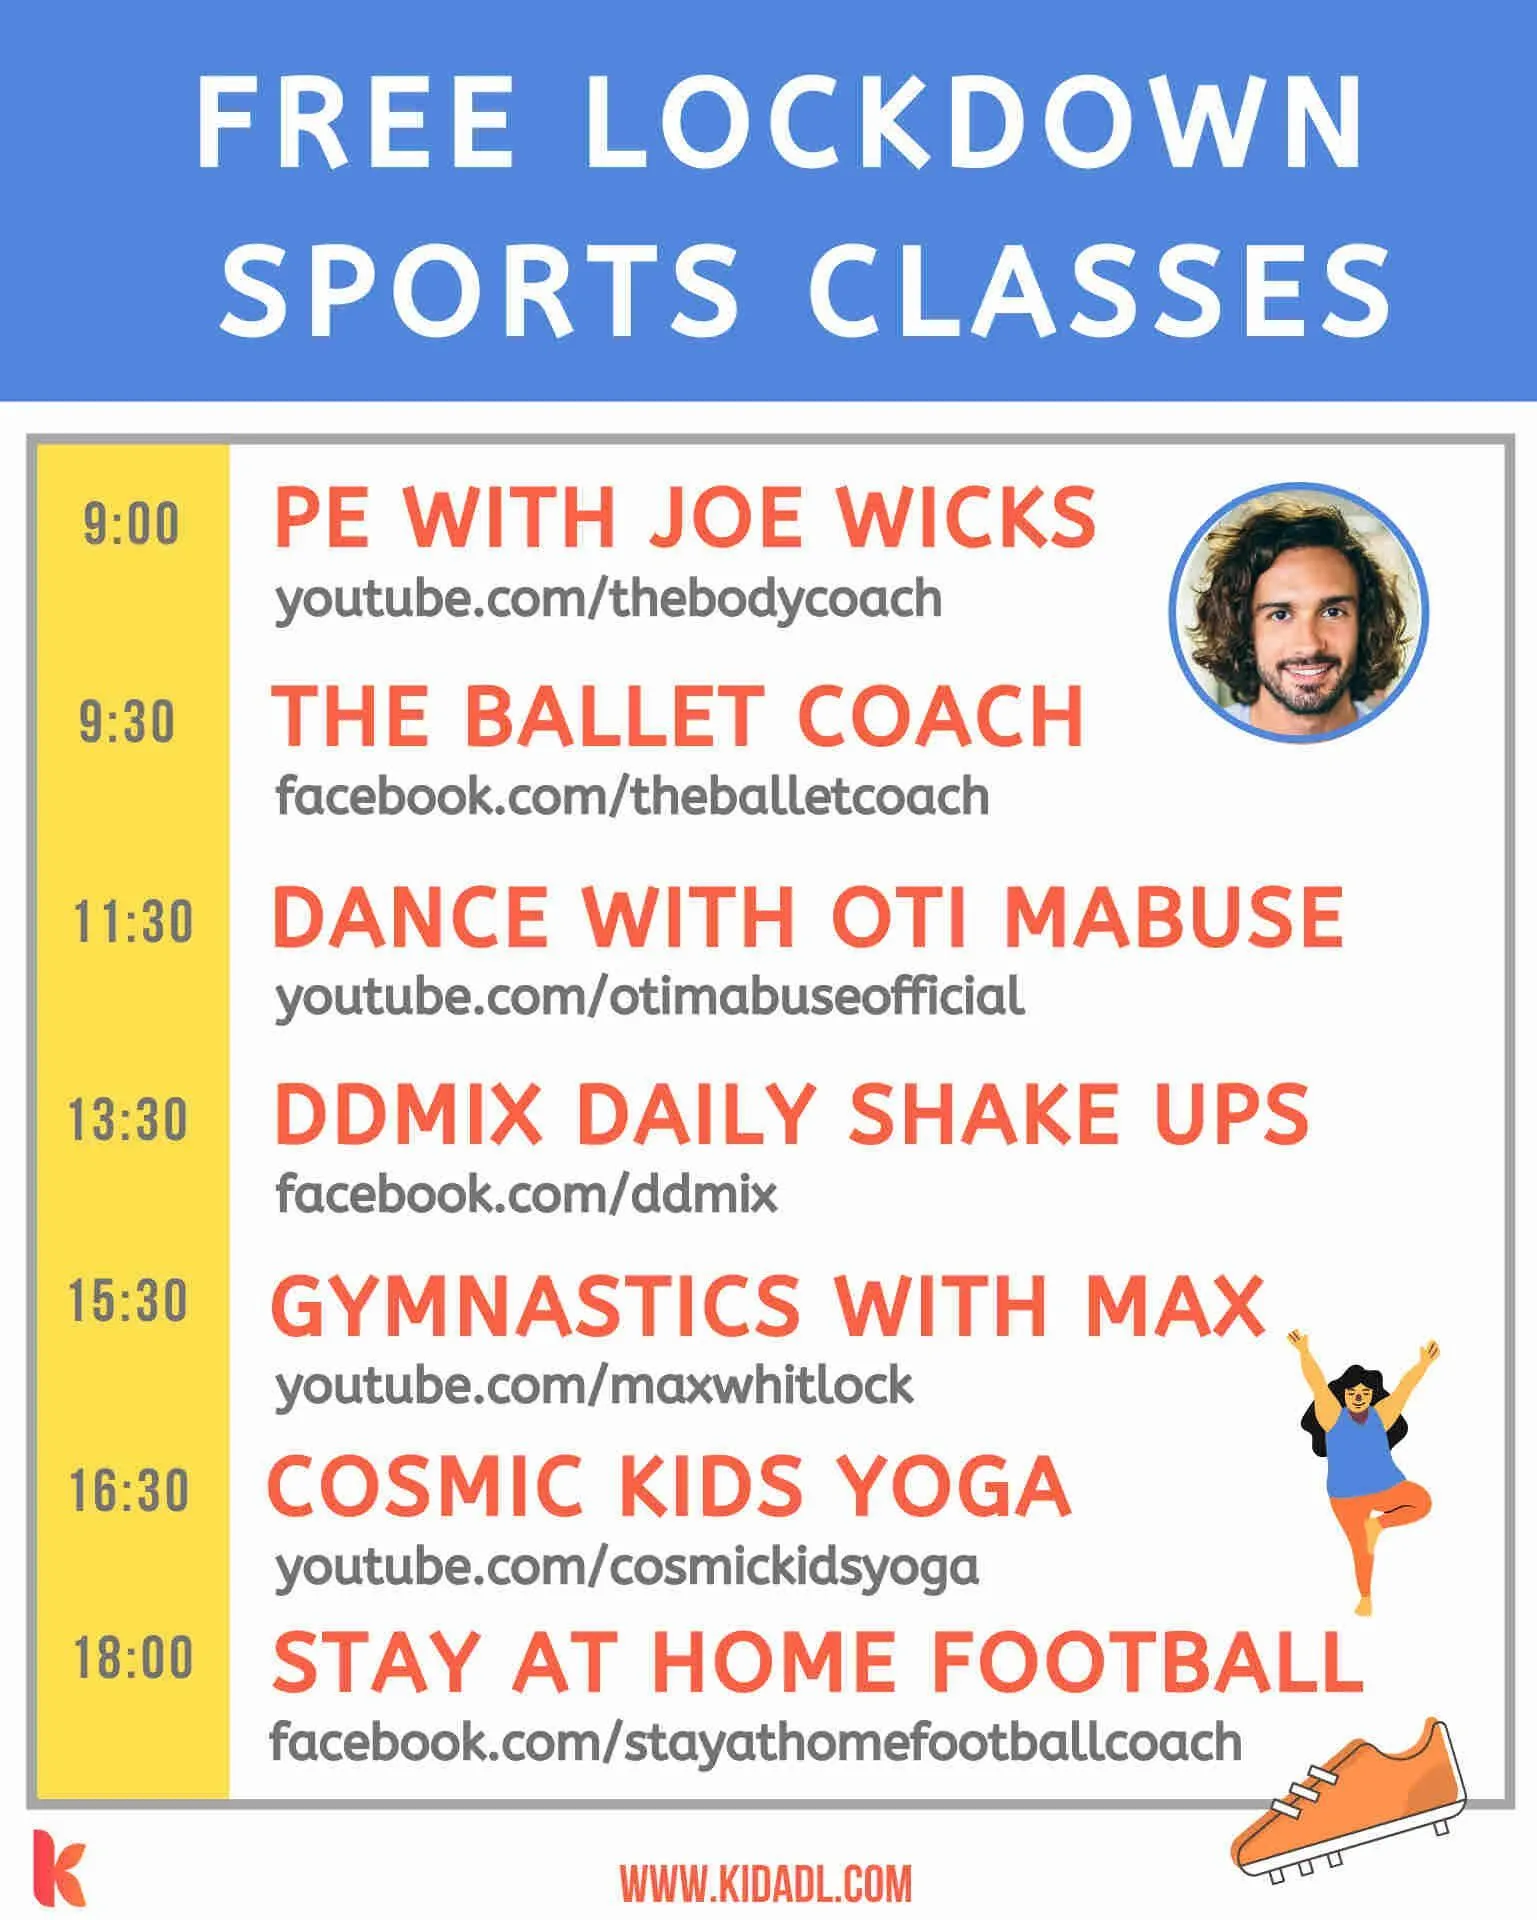 Sports classes for kids.